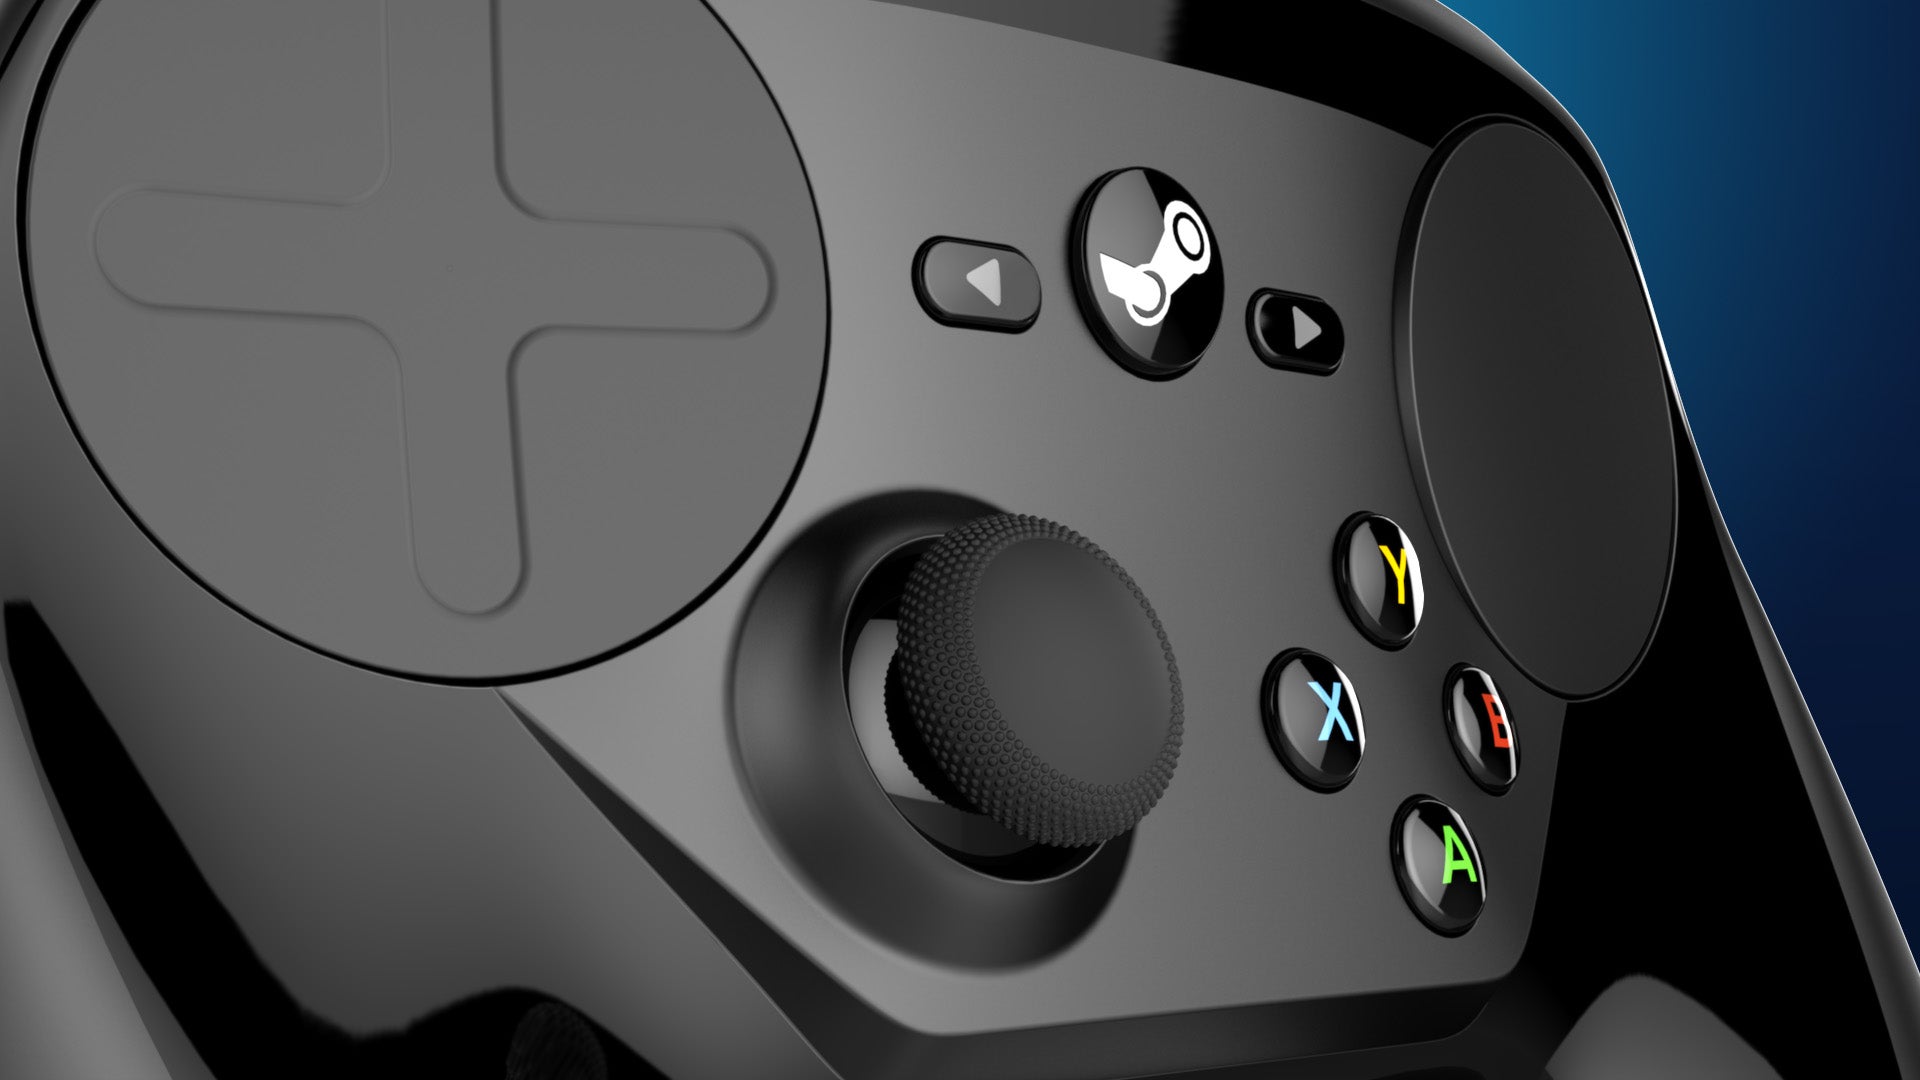 Image for Valve Complete Pack offered to Mac users for Steam Link and controller compatibility issues